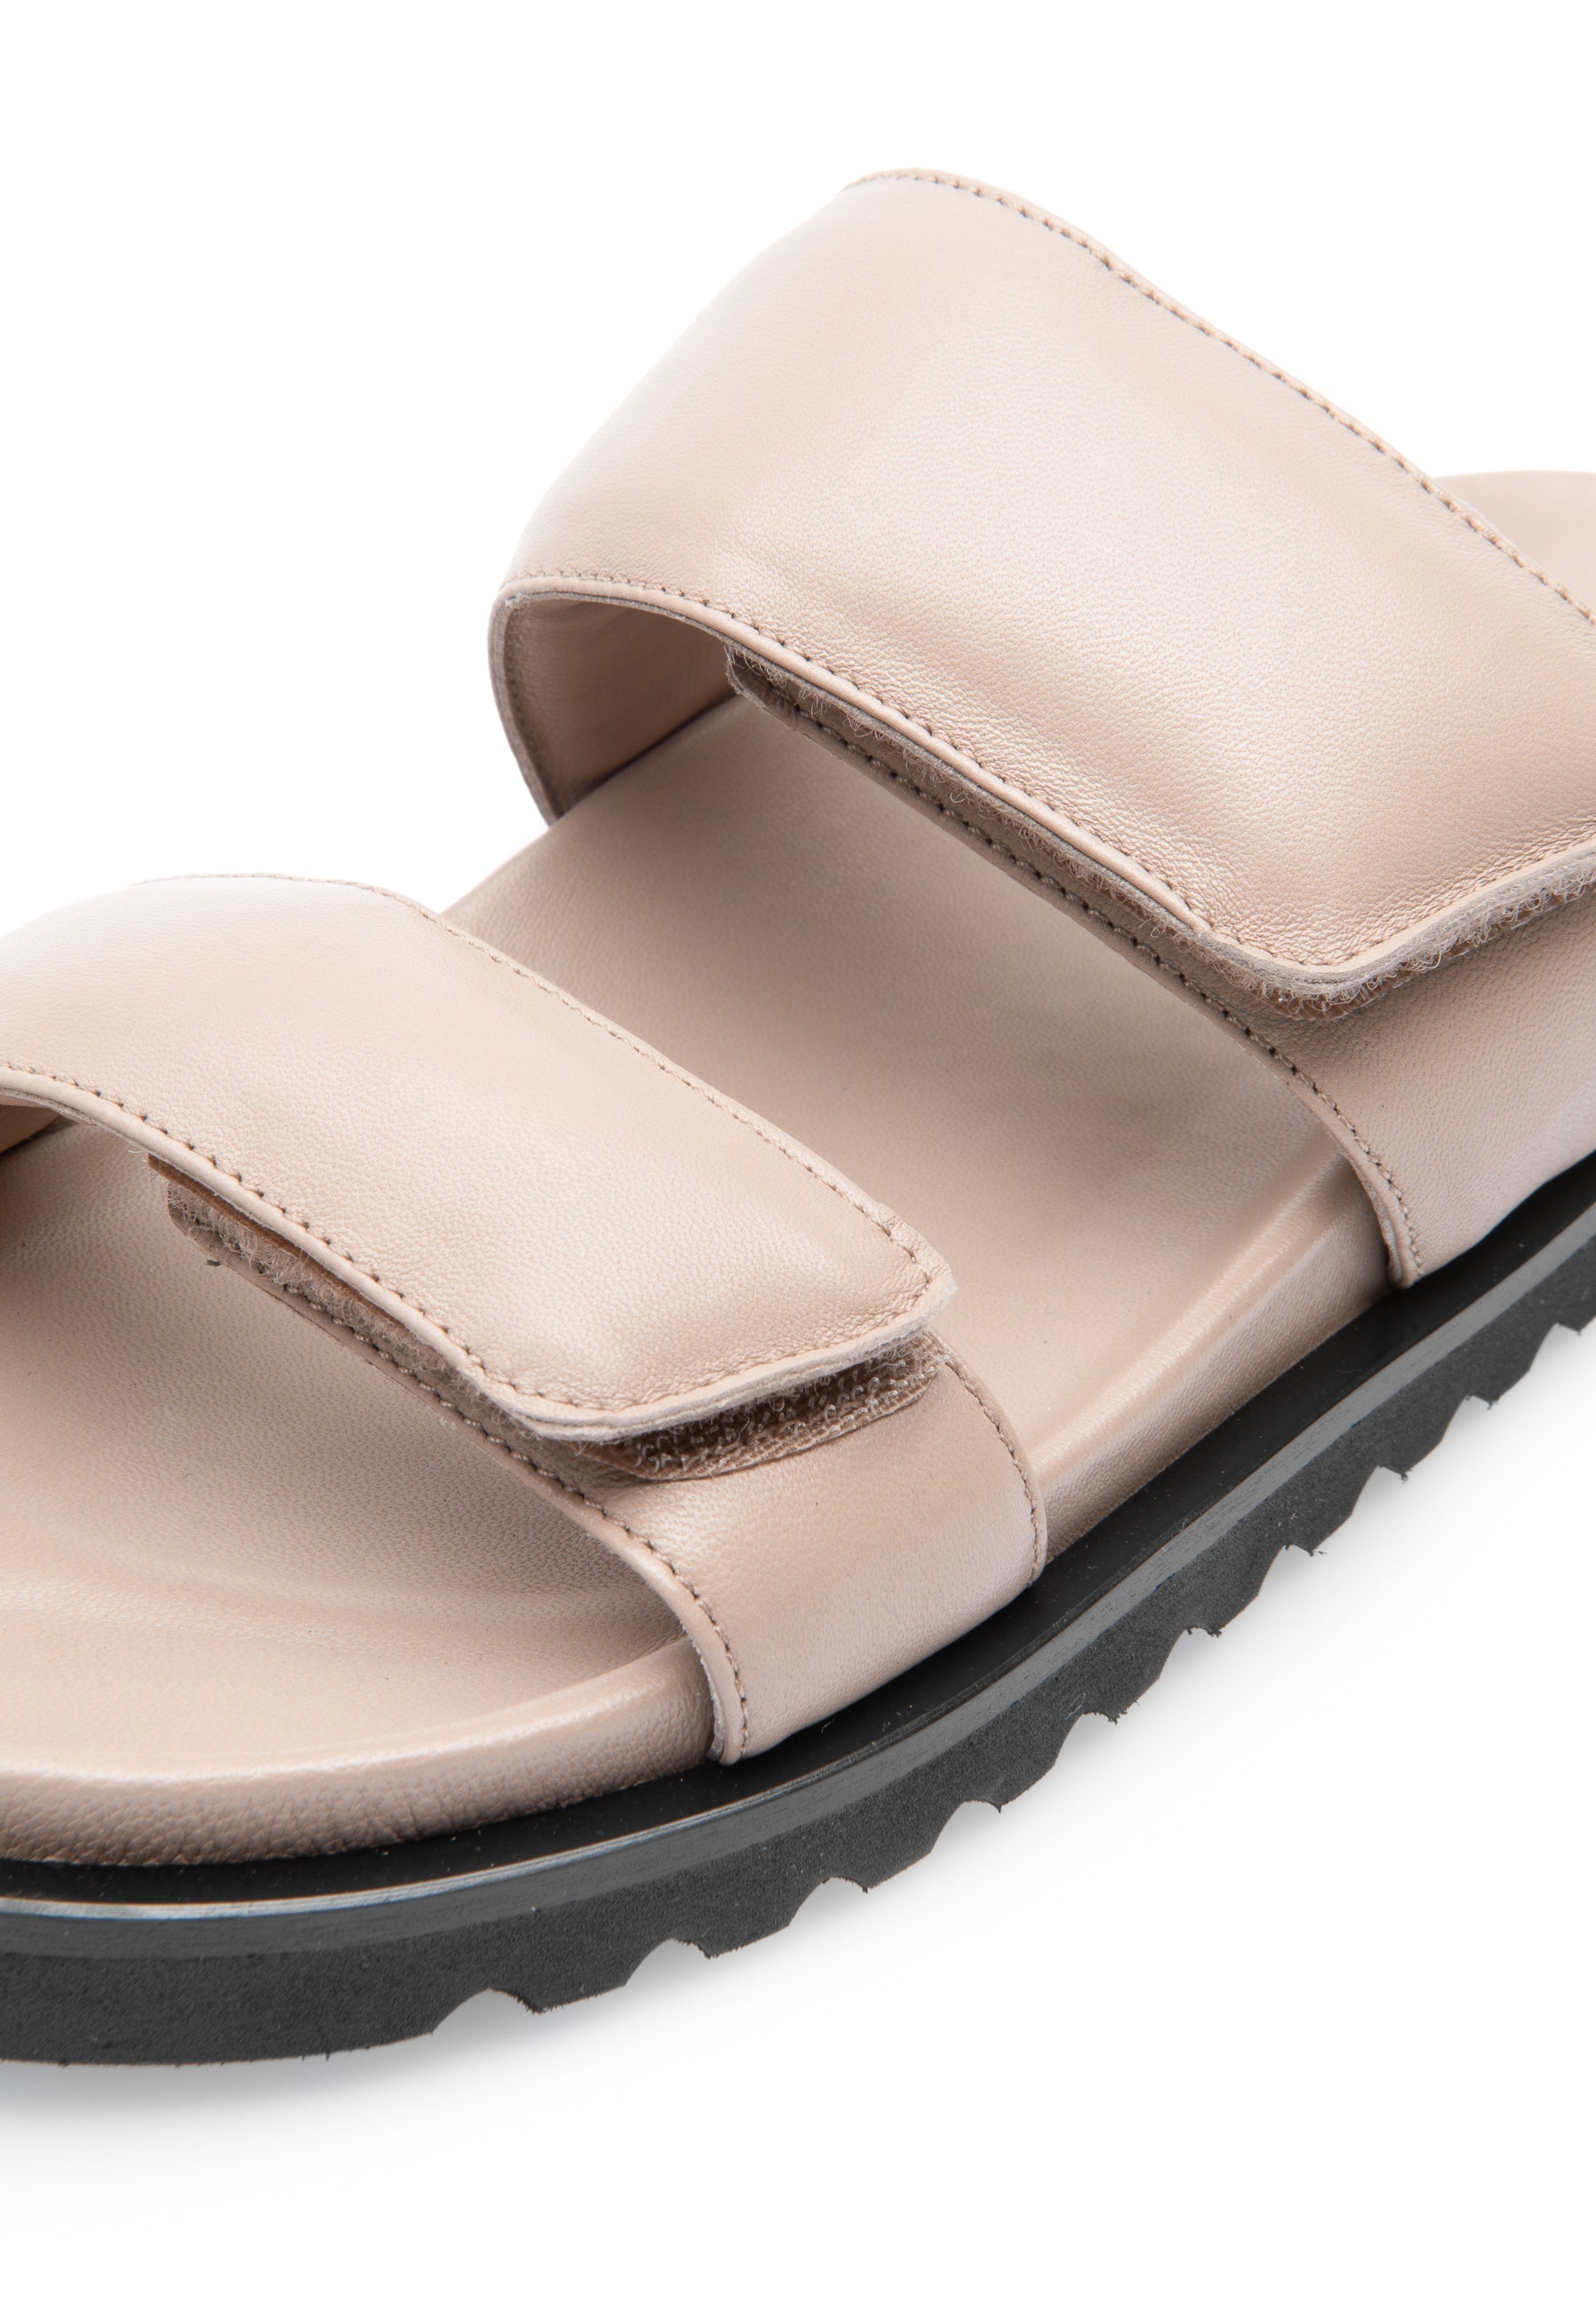 Corine Taupe Leather Puffy Sandals LAST1514 - 7